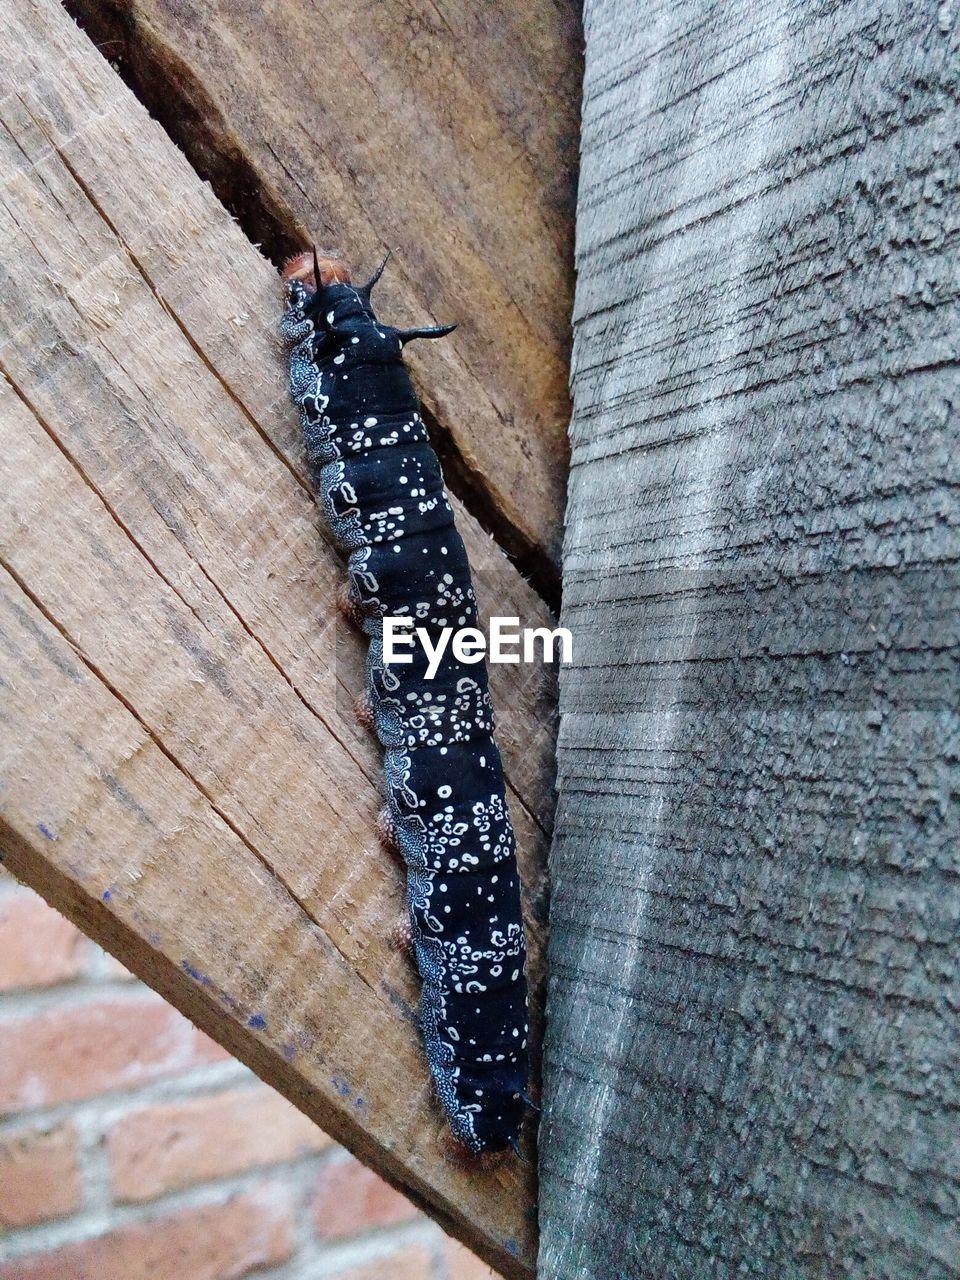 HIGH ANGLE VIEW OF INSECT ON WOOD